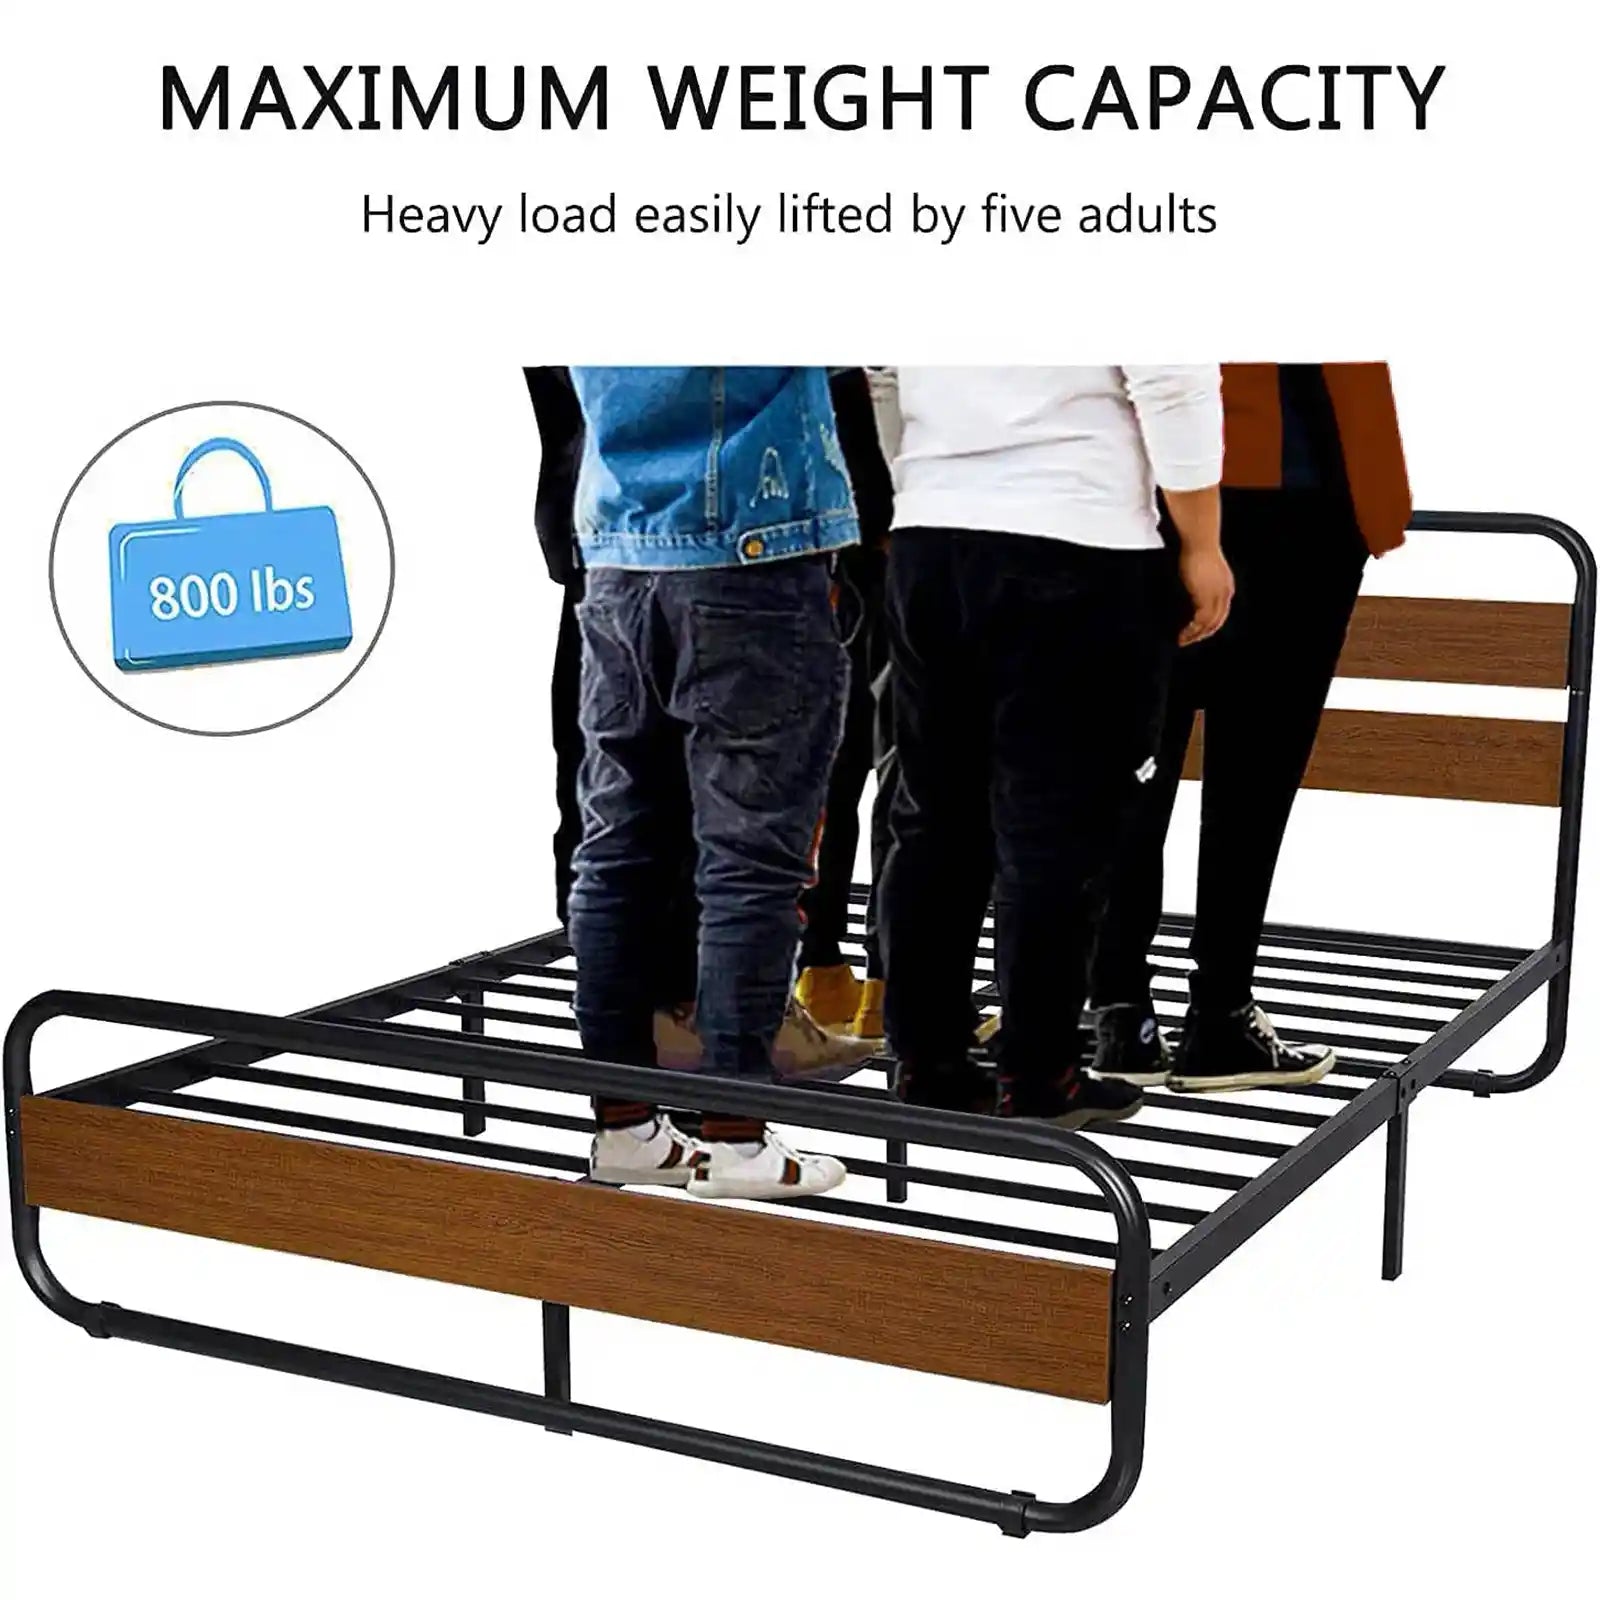 Heavy Duty Rounded Shaped Platform Bed Frame with Wooden Headboard